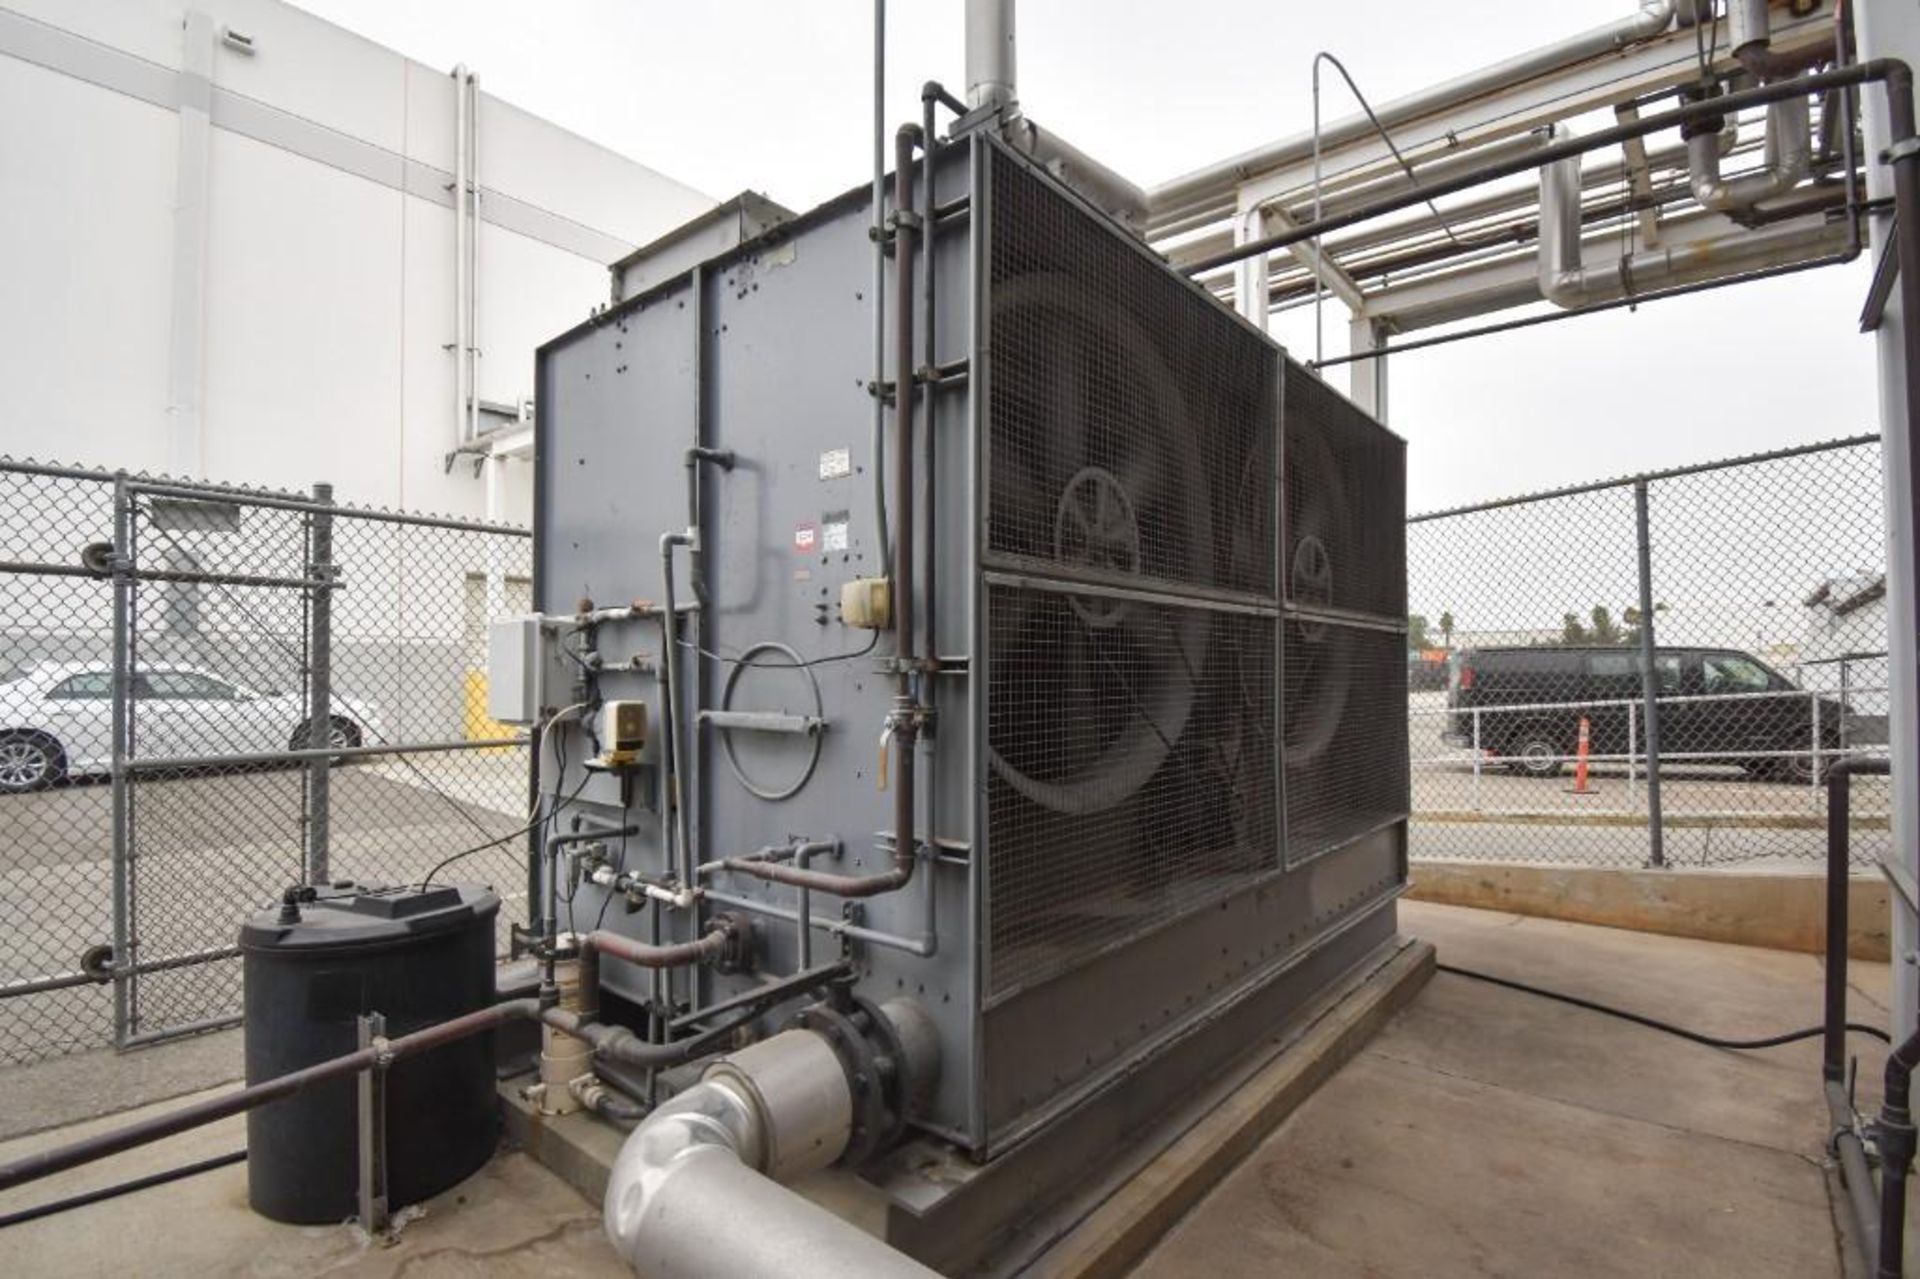 Baltimore Cooling Tower with Pump and Control Panel - Image 8 of 15